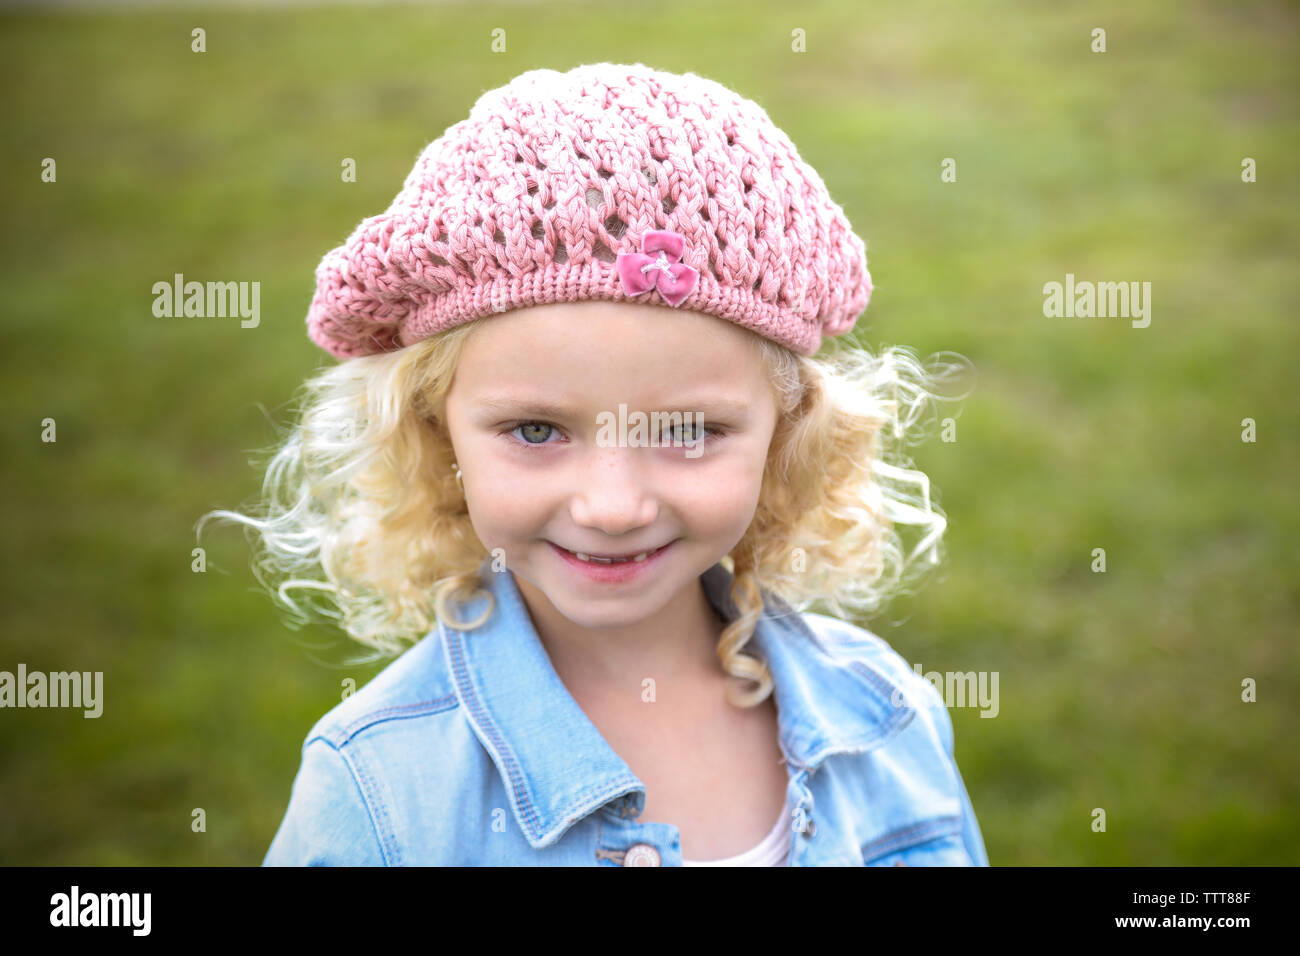 young girl with blonde hair in hat smiling with missing front teeth Stock Photo